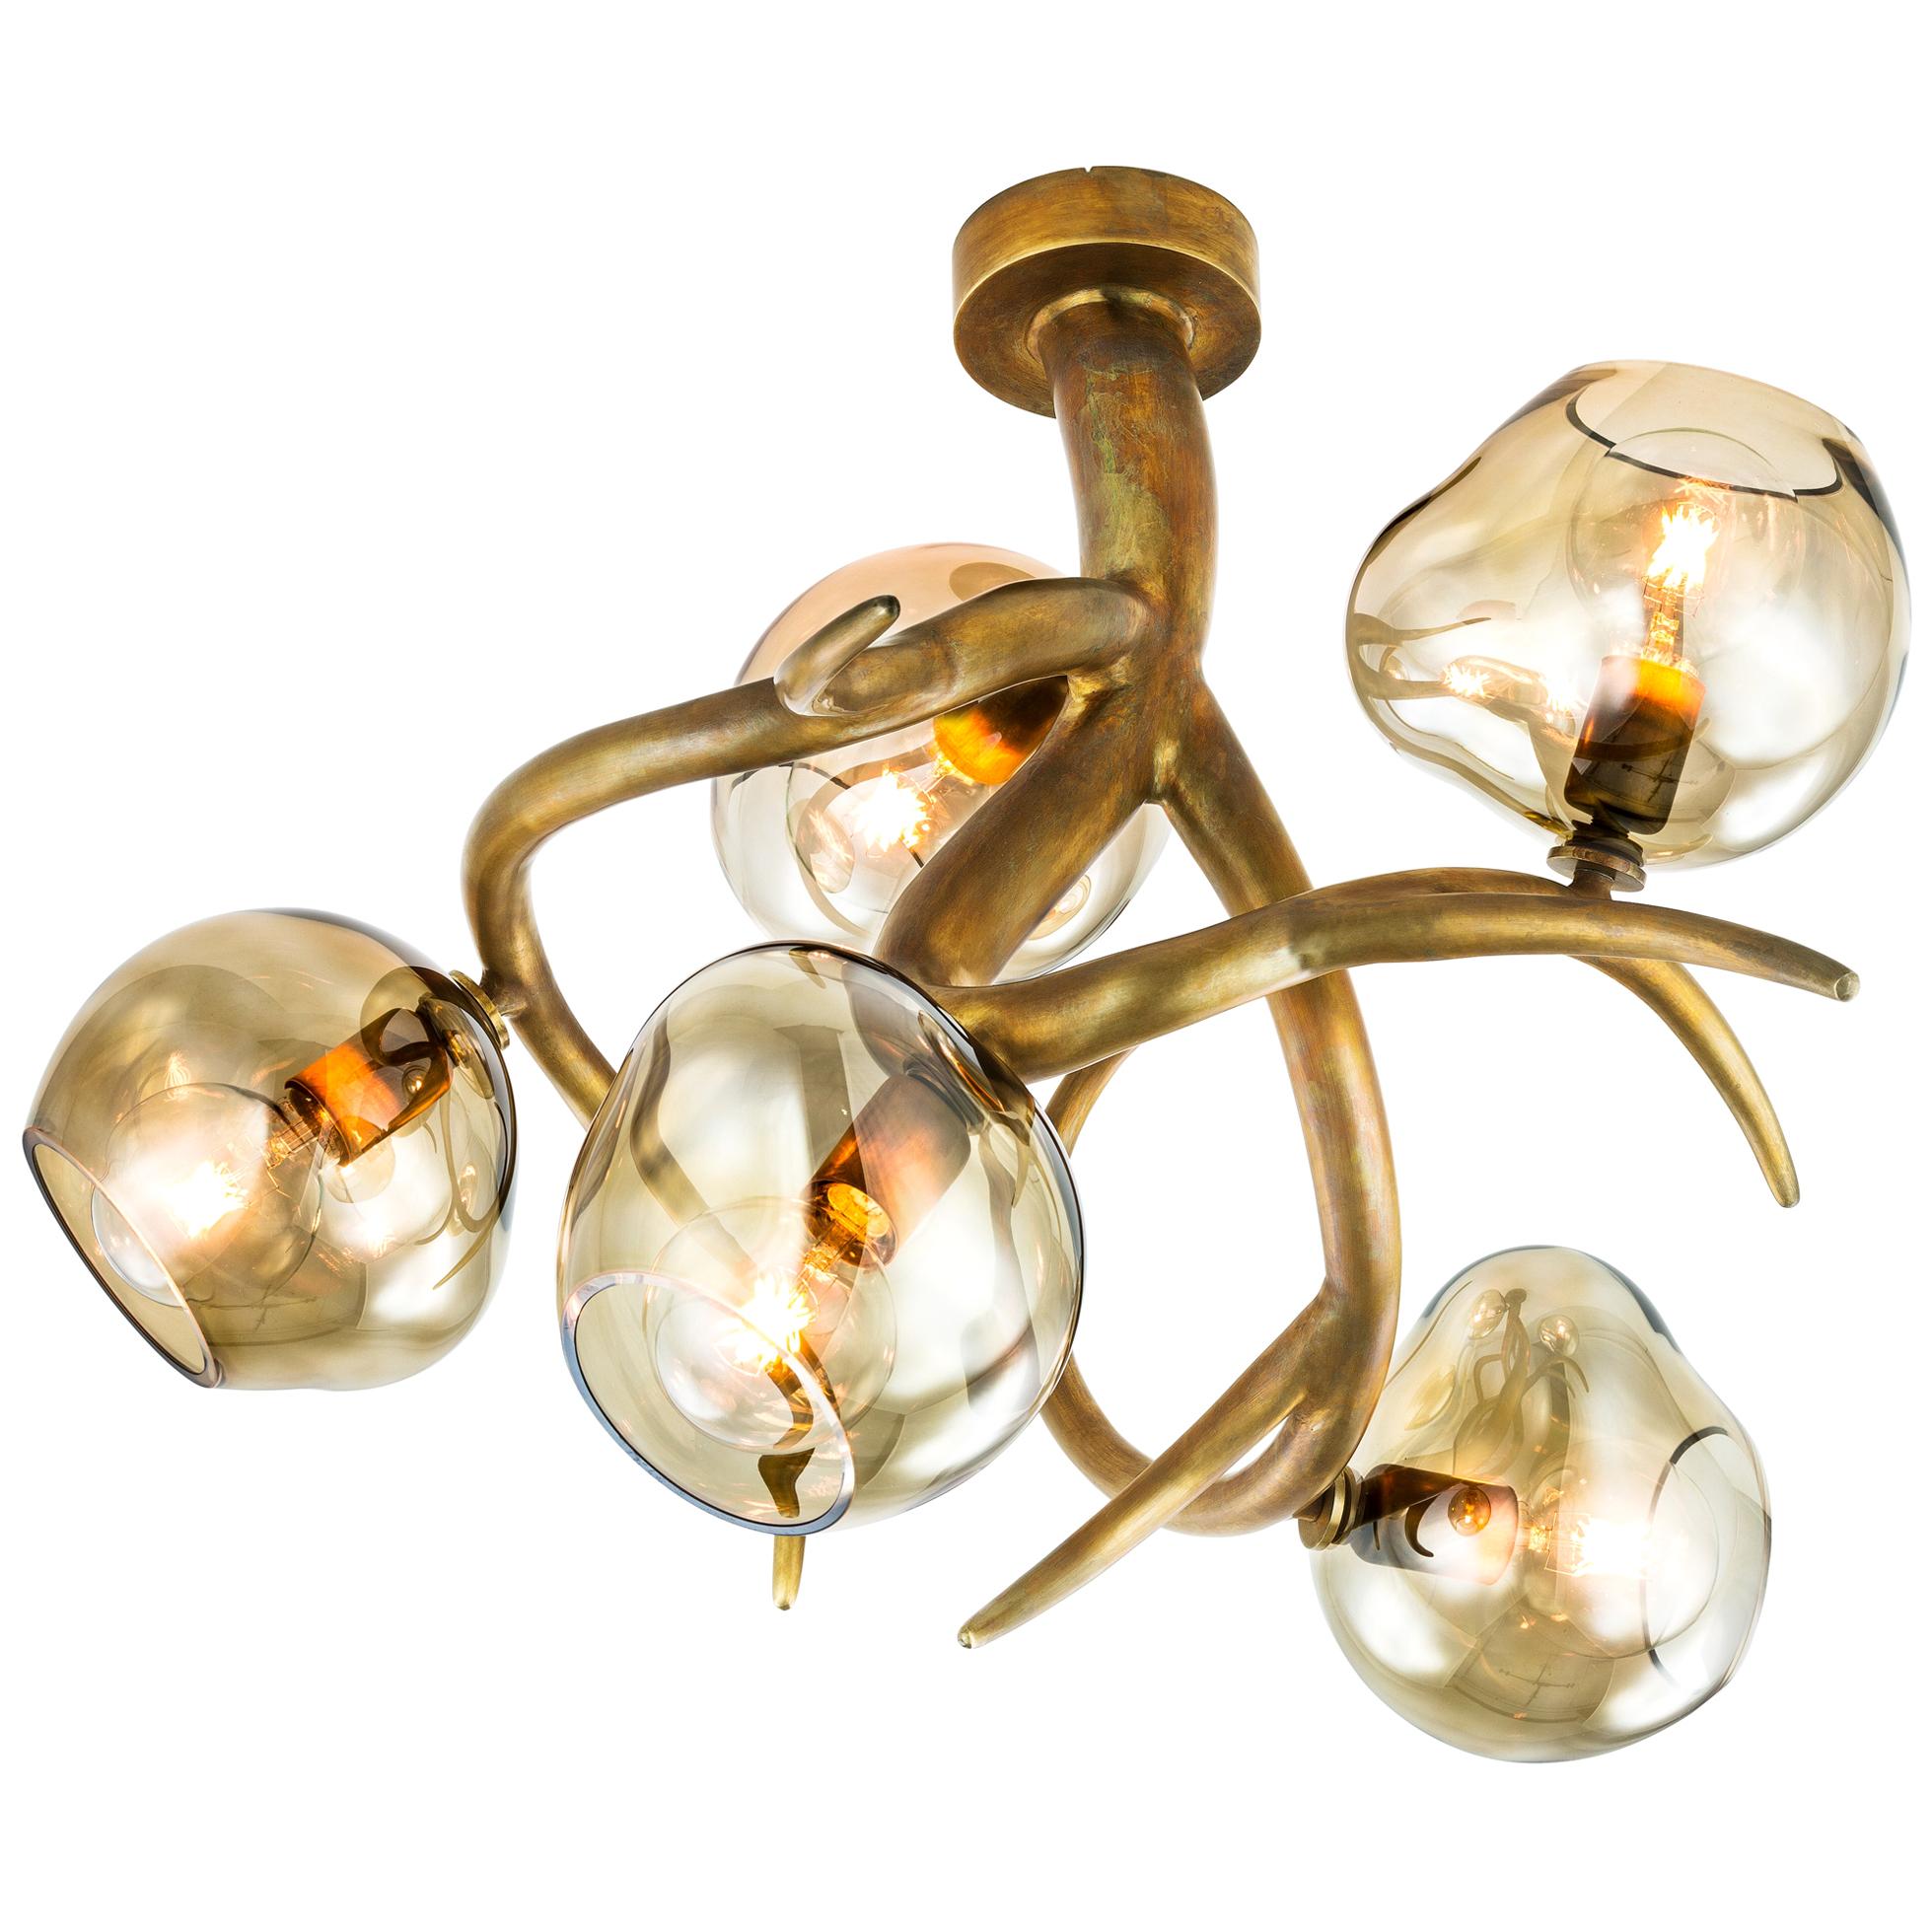 Modern Ceiling Chandelier with Colored Glass in a Brass Burnished Finish, Ersa